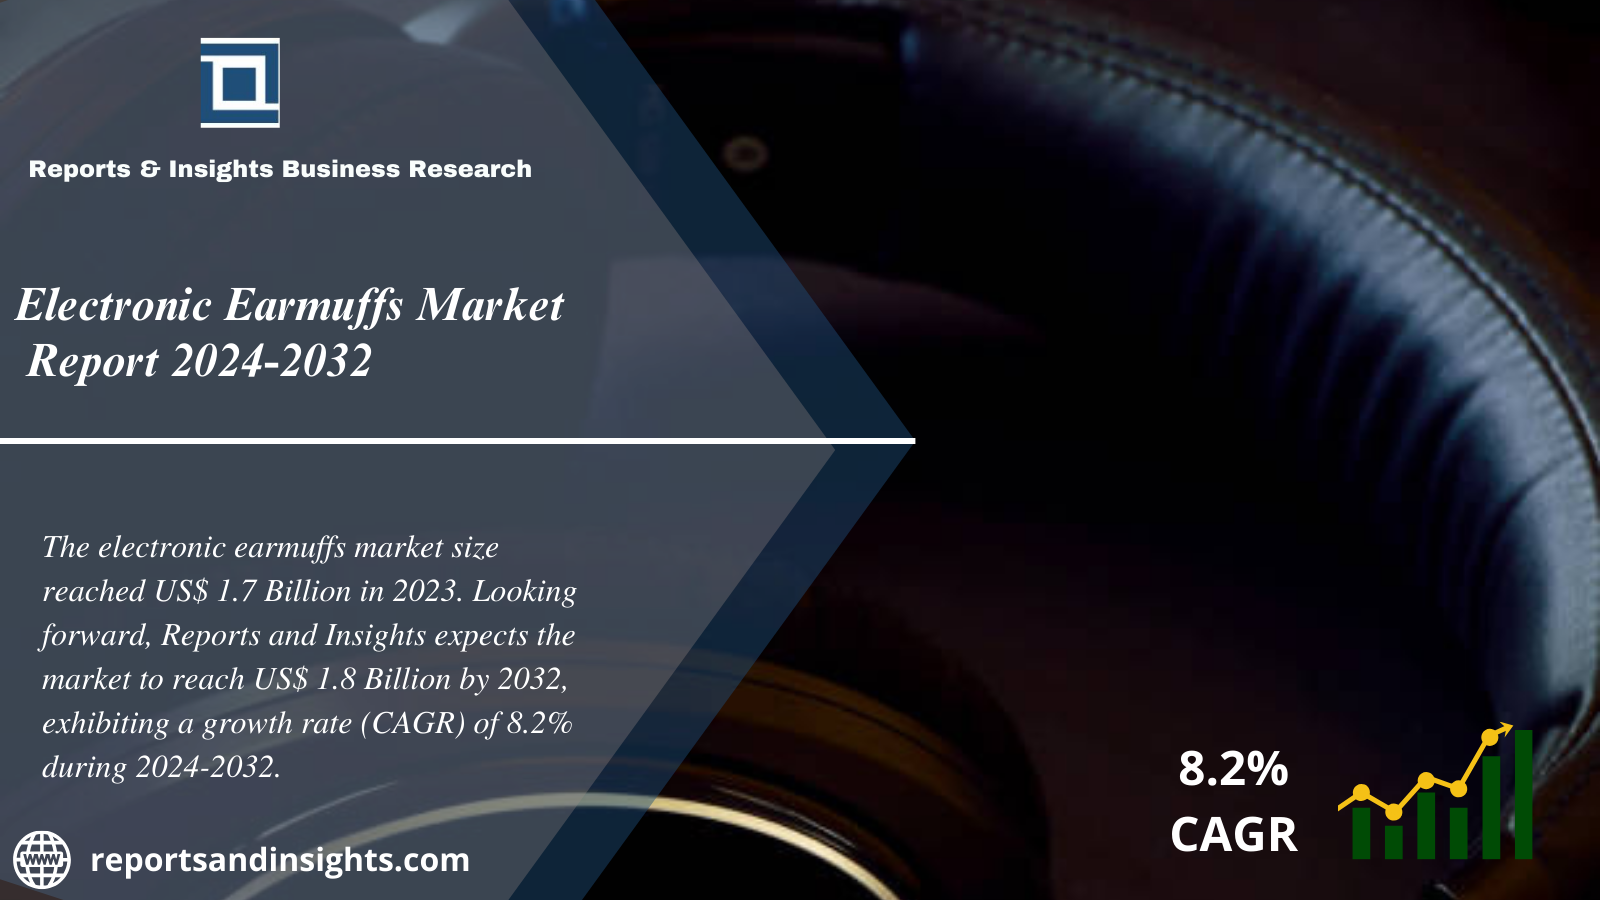 Electronic Earmuffs Market 2024-2032: Trends, Growth, Share, Size and Leading Players